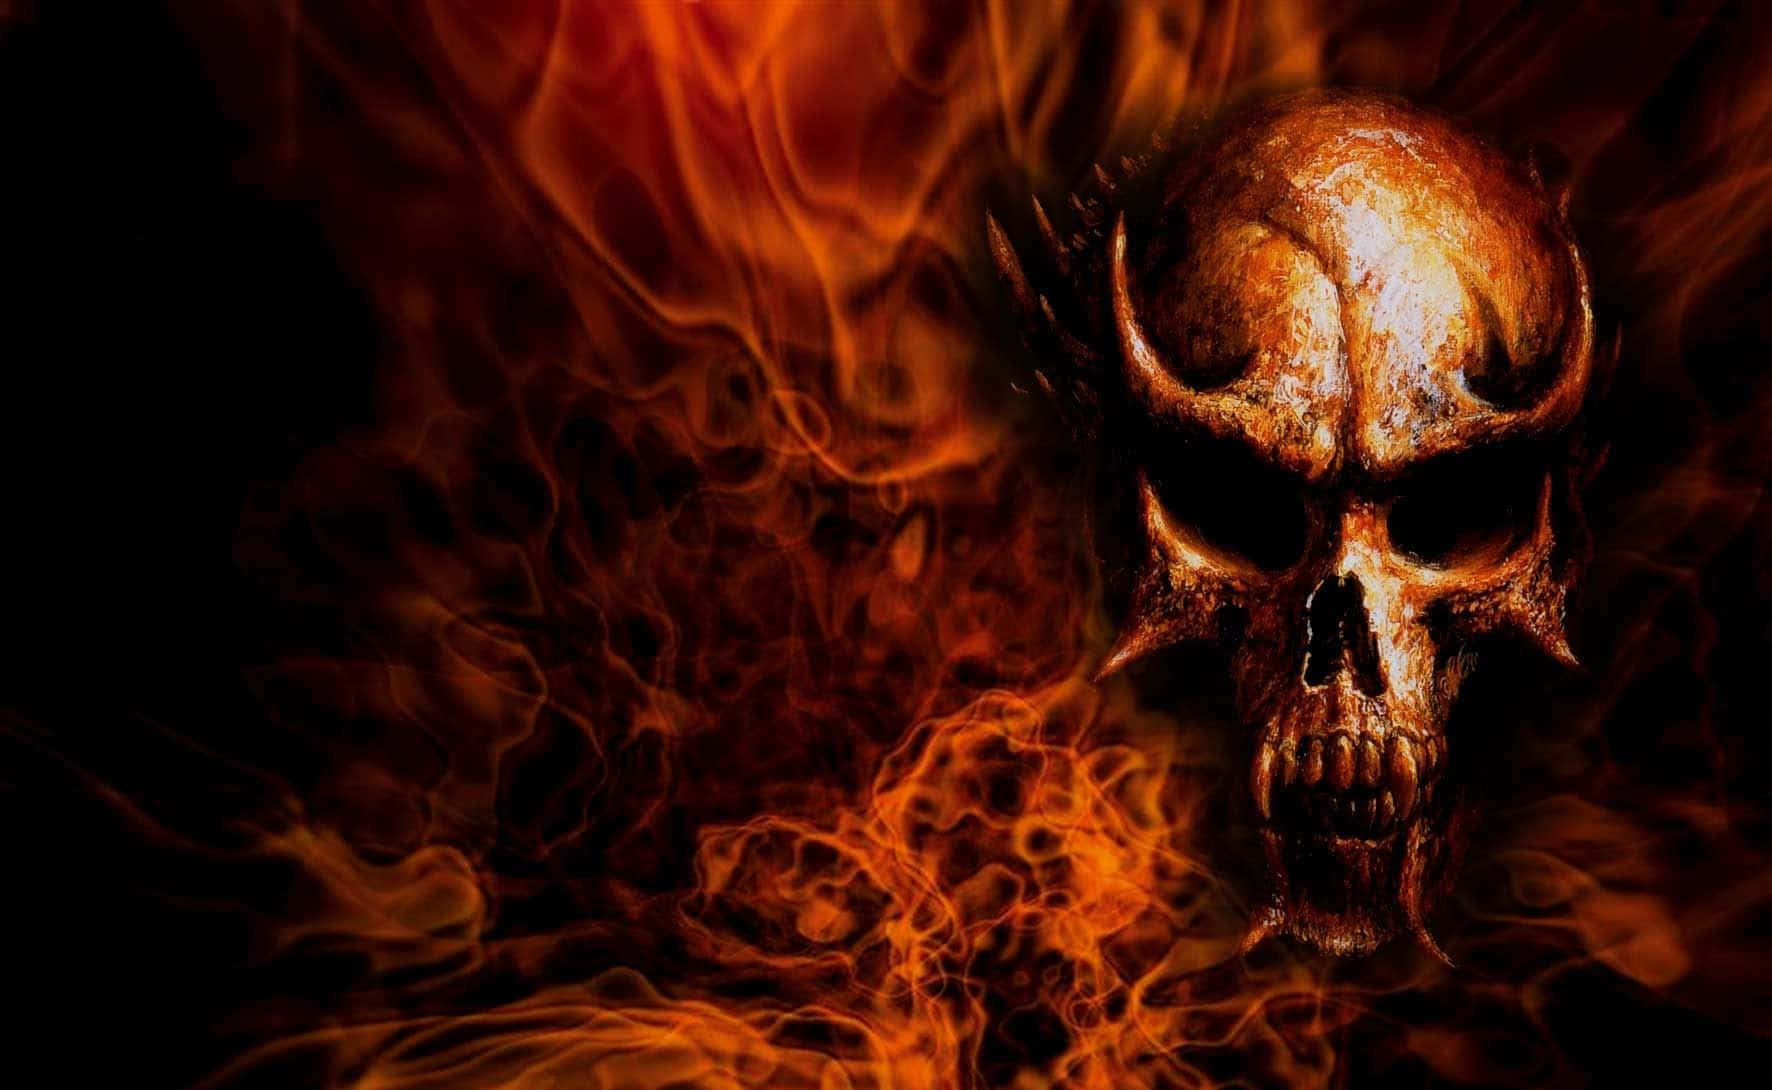 Dare To Take The Path Into The Unknown with The Flaming Skull Wallpaper